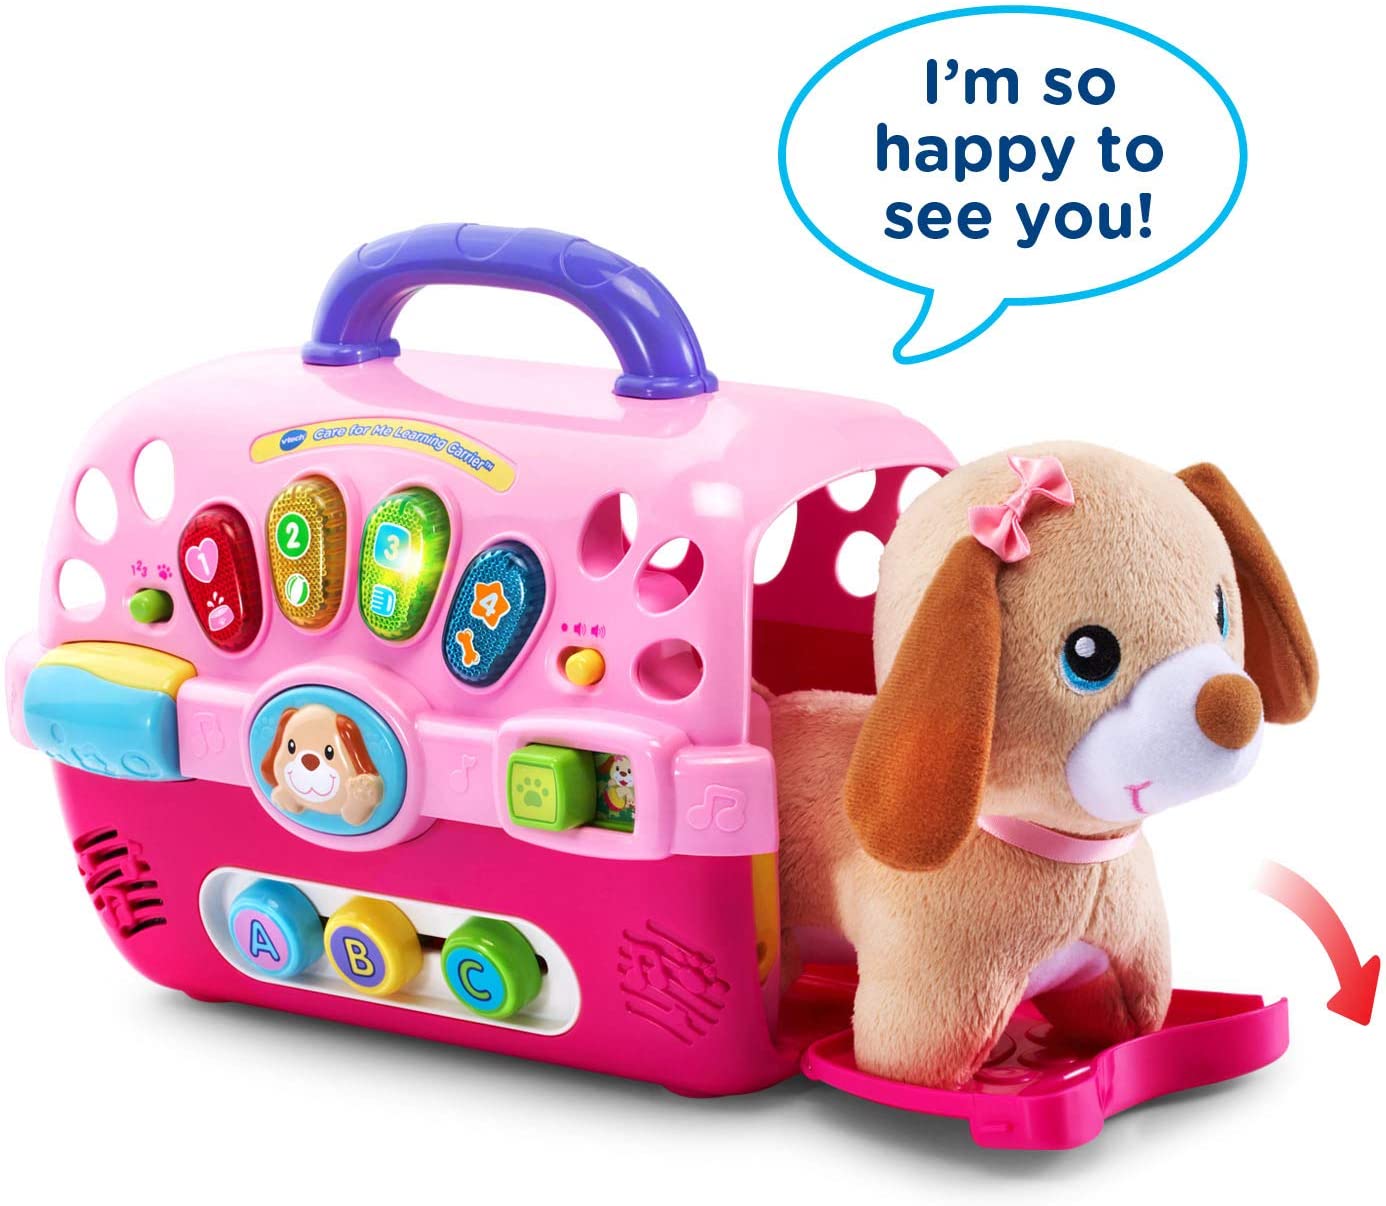 VTech Care for Me Learning Carrier, Pink - Features 100+ songs, melodies, sounds and phrases